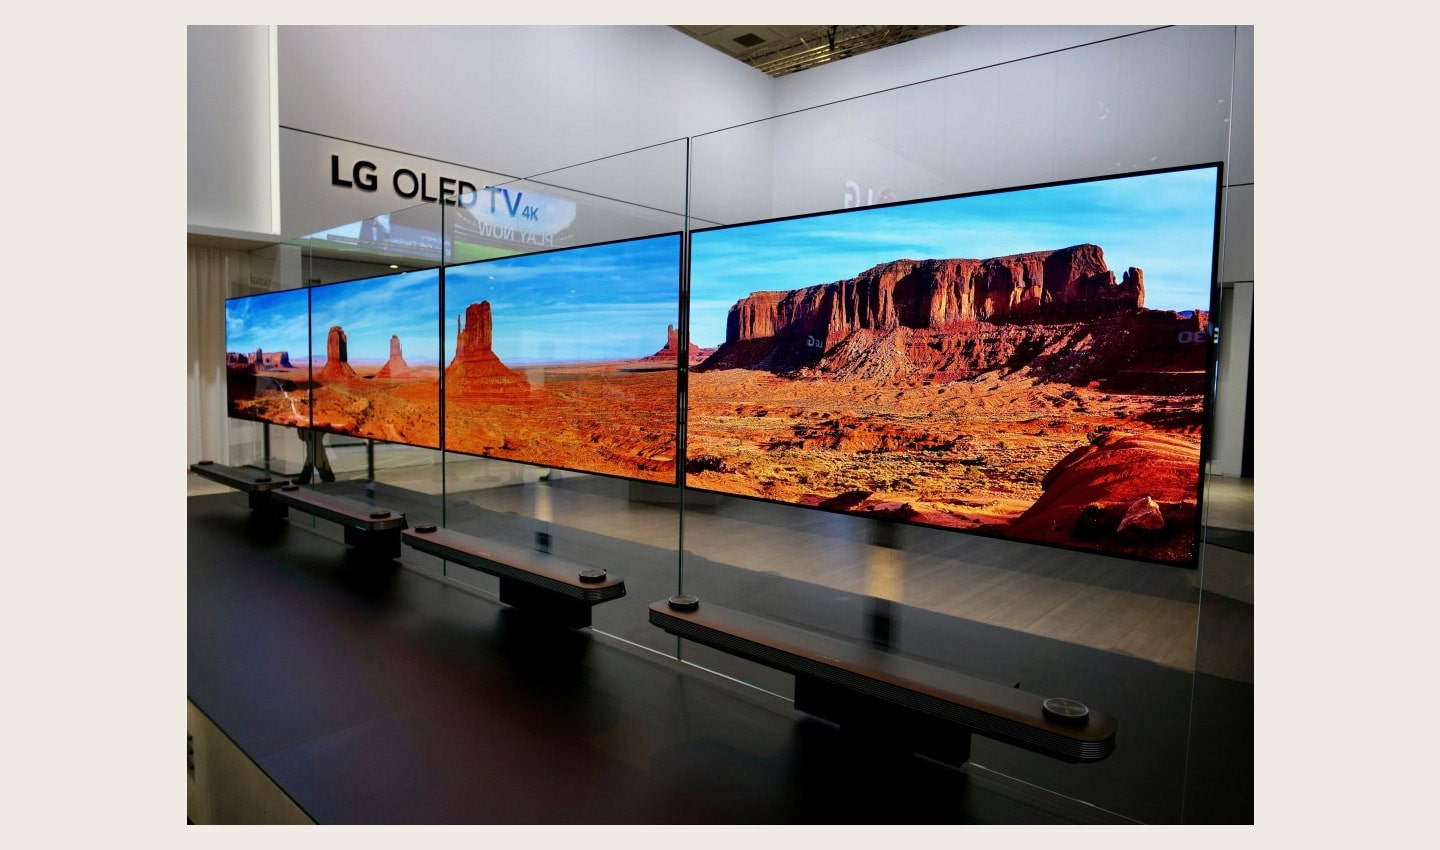 Another view of four LG SIGNATURE OLED TV W sets placed side by side on a display stand at LG's booth